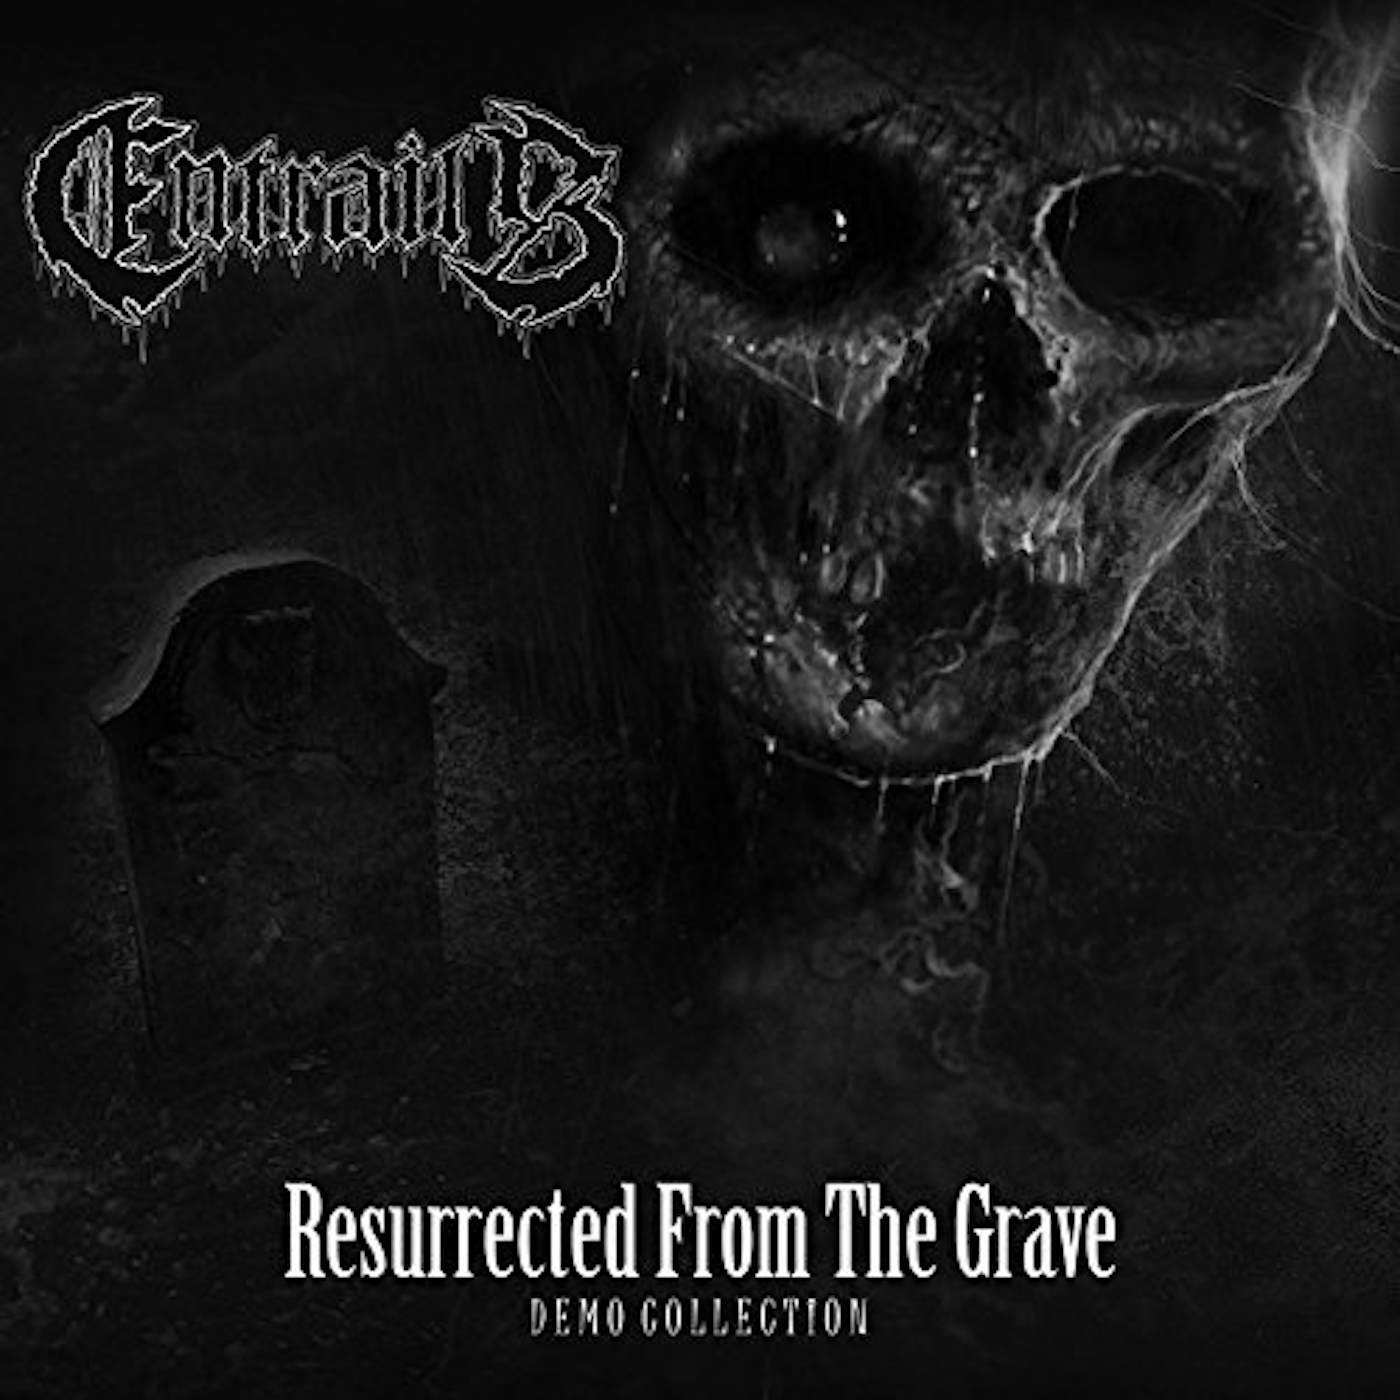 Entrails RESURRECTED FROM THE GRAVE Vinyl Record